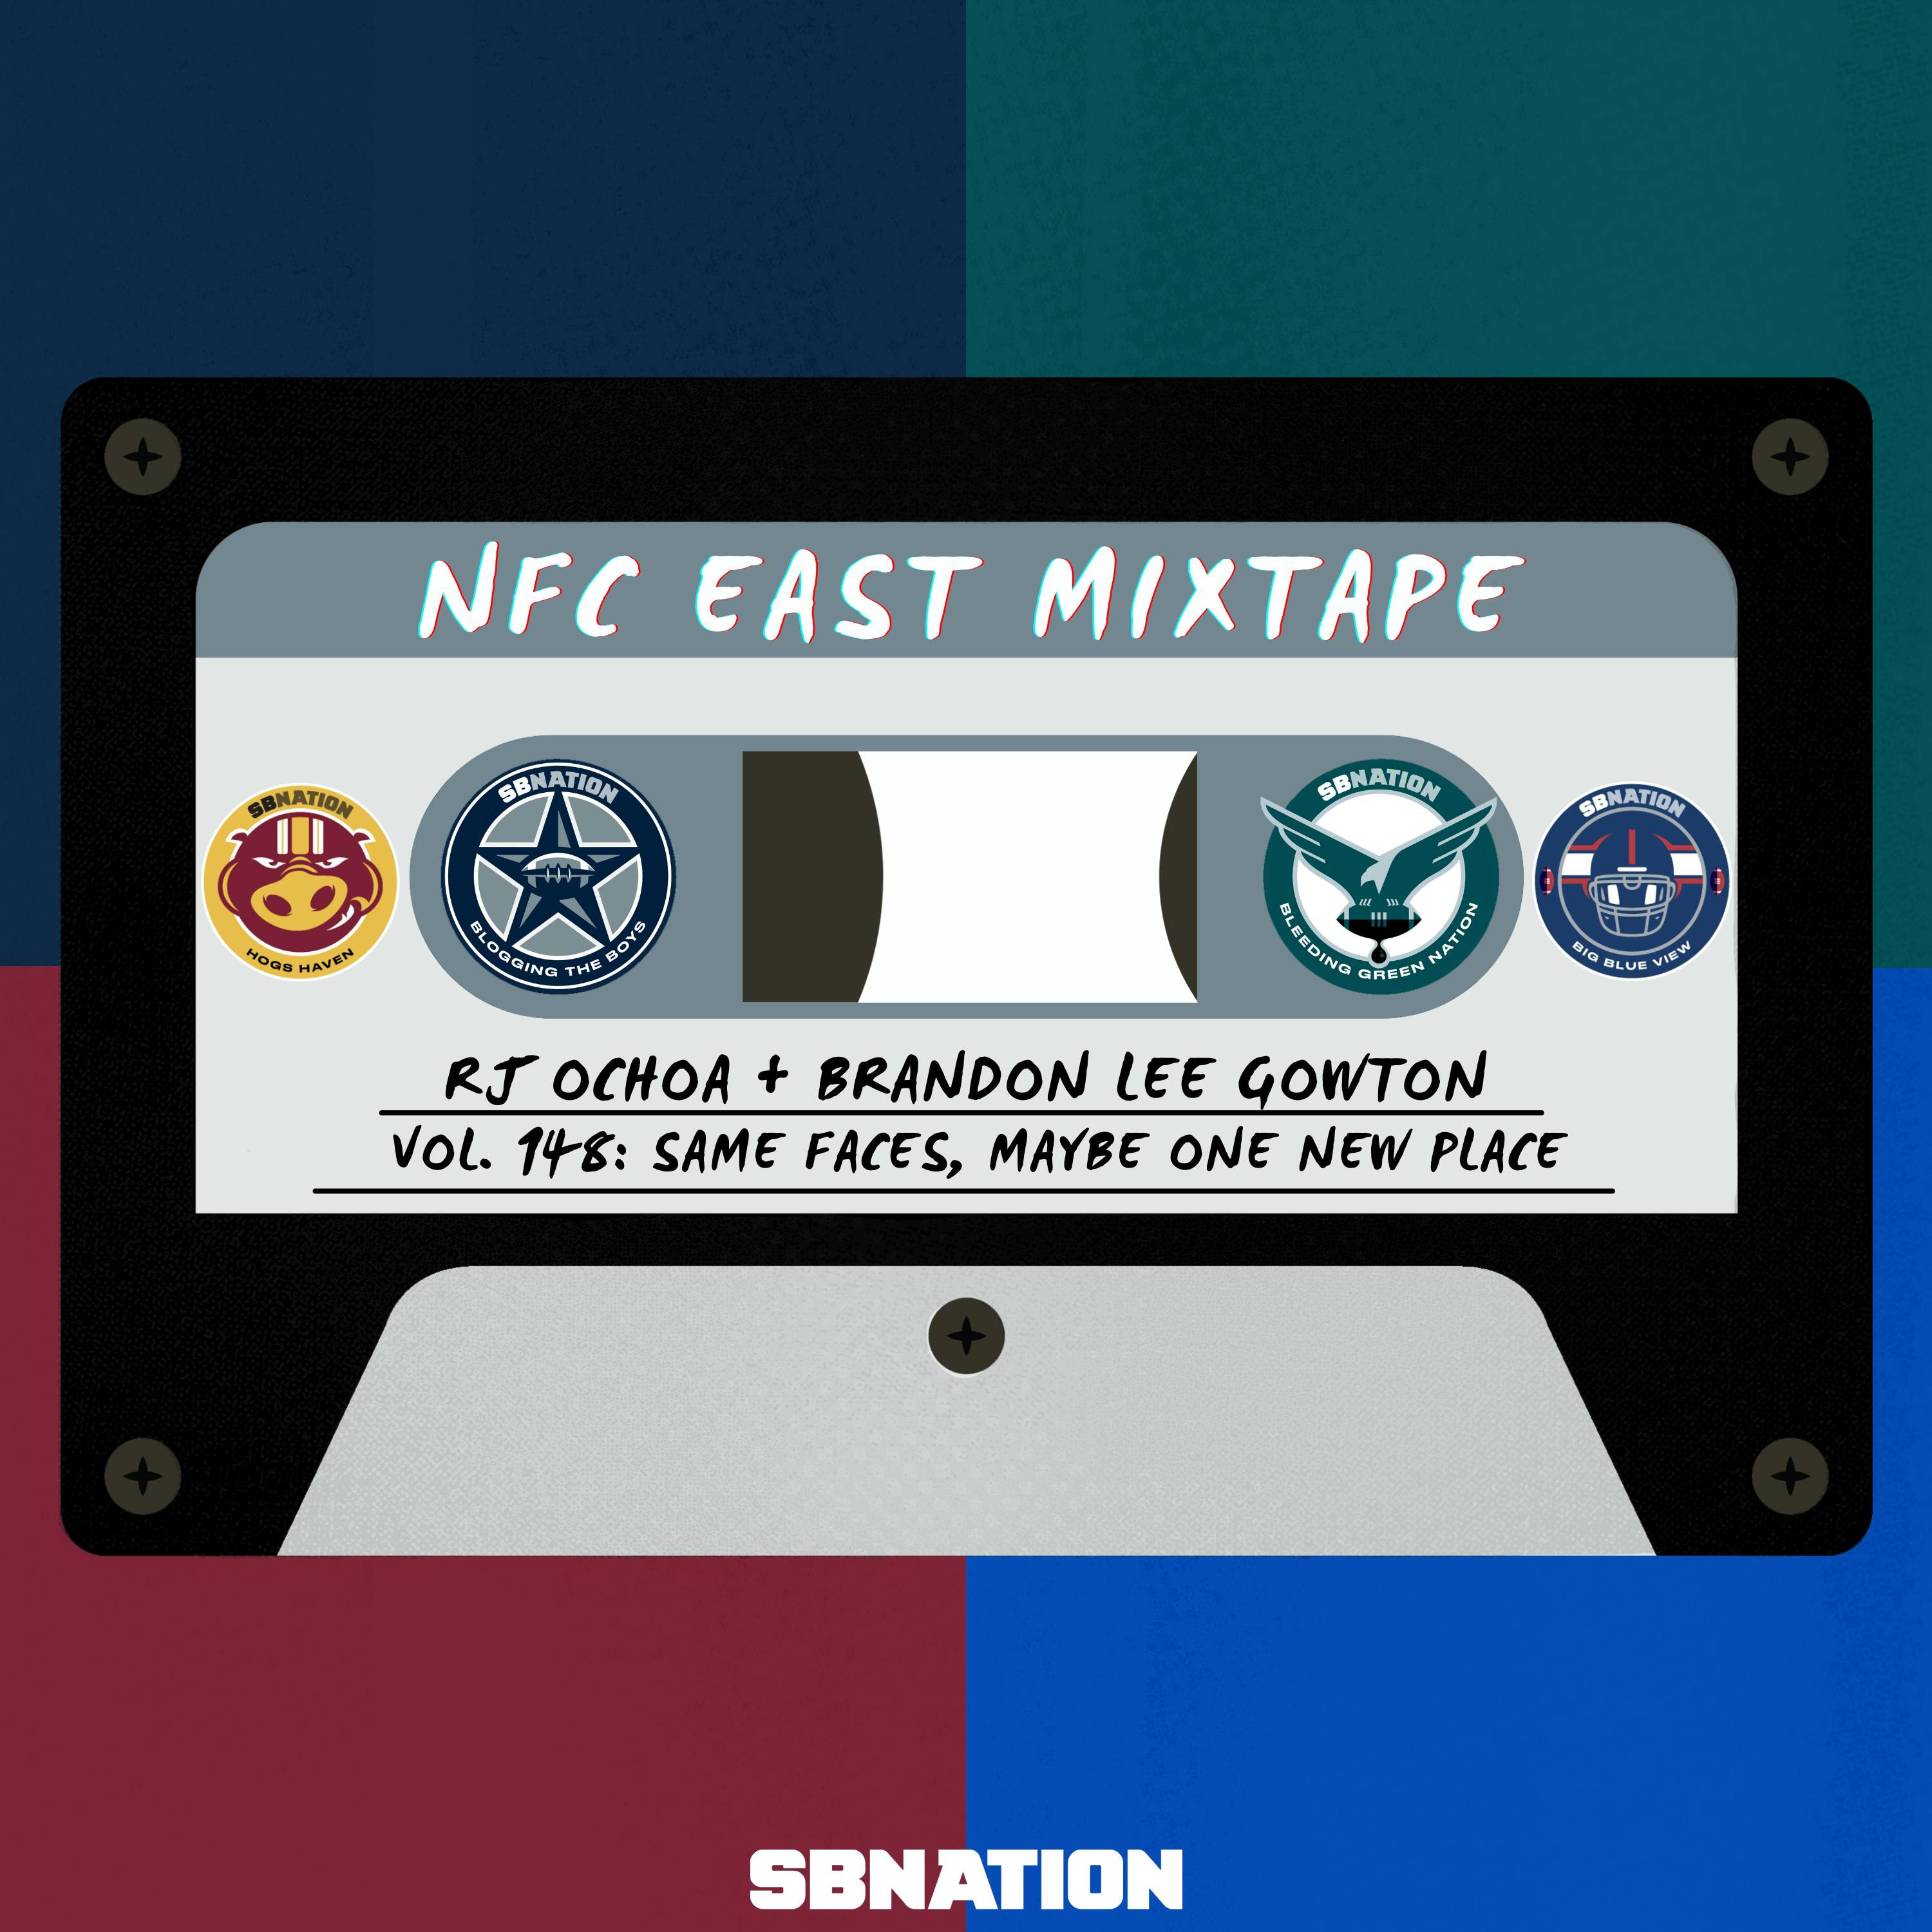 NFC East Mixtape Vol.148: Same faces, maybe one new place